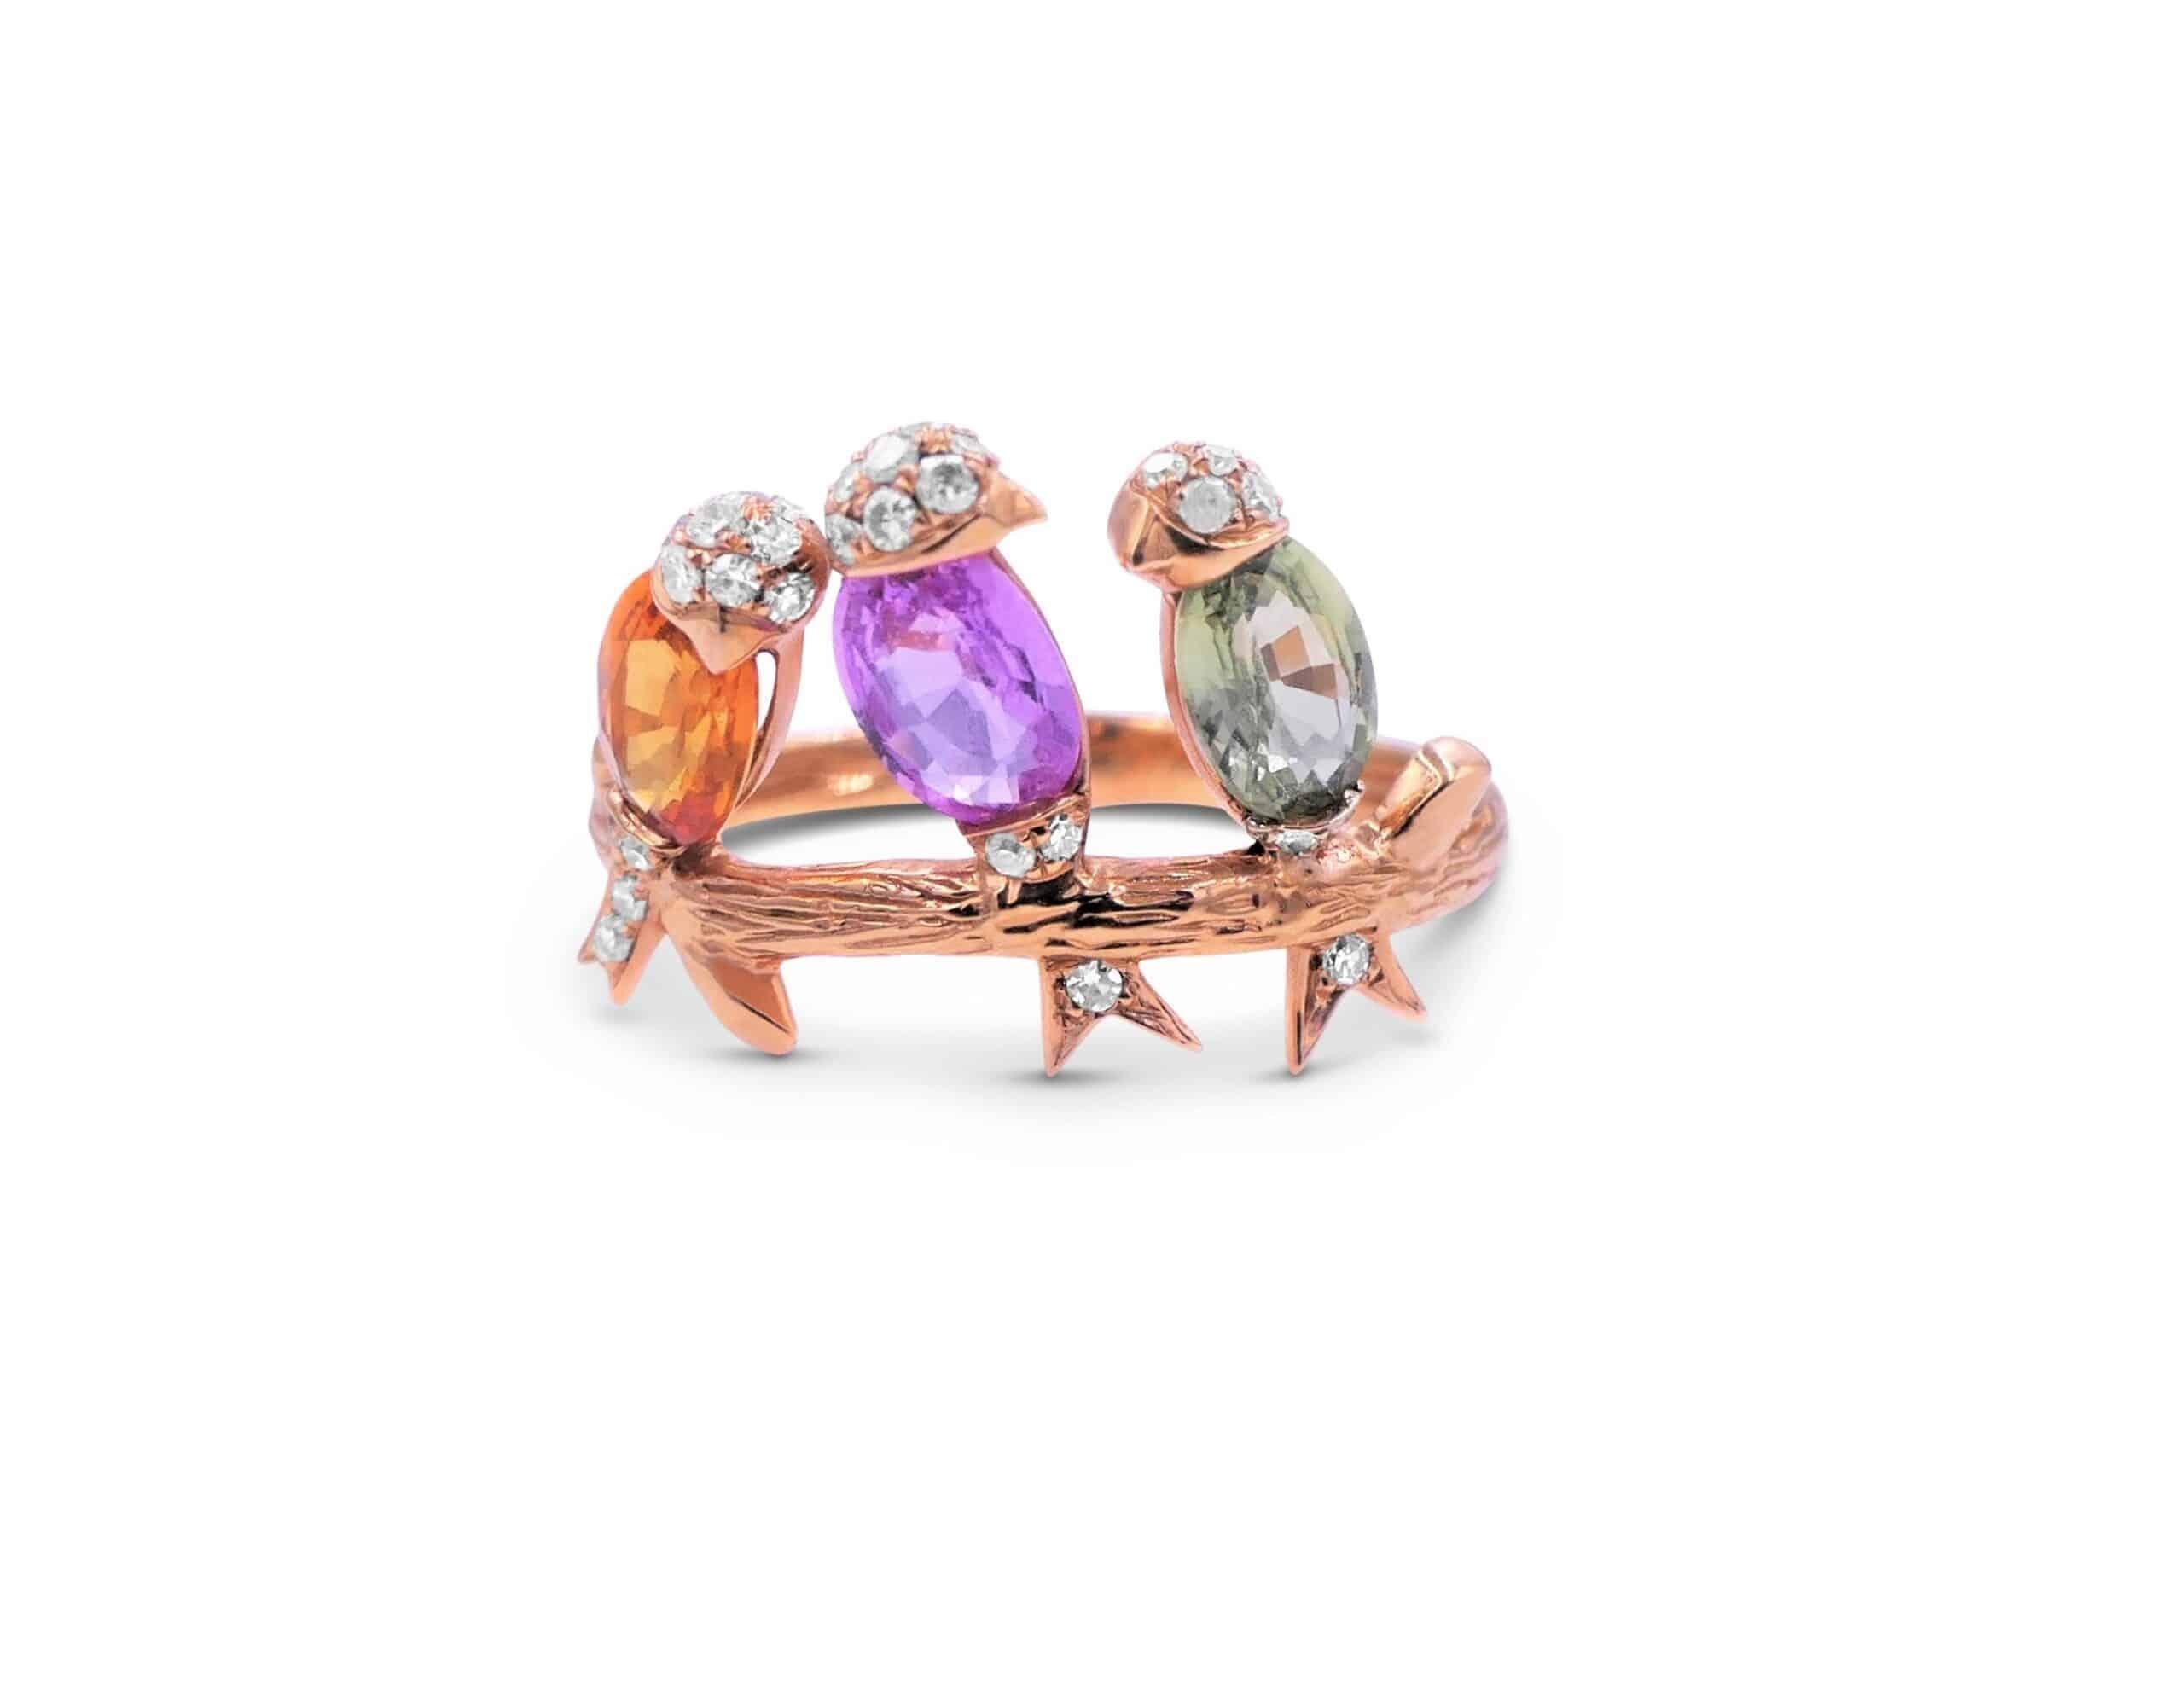 Diamond Rainbow Sapphire Gemstone Bird Canaries Parrots Rose Gold Cocktail Ring
18 Karat Rose Gold
Genuine Diamonds Sapphires & Amethyst
2.00 CTW Diamonds & Gemstones
Current Regular Size 7
Very Unique, Whimsical Design - One of a Kind